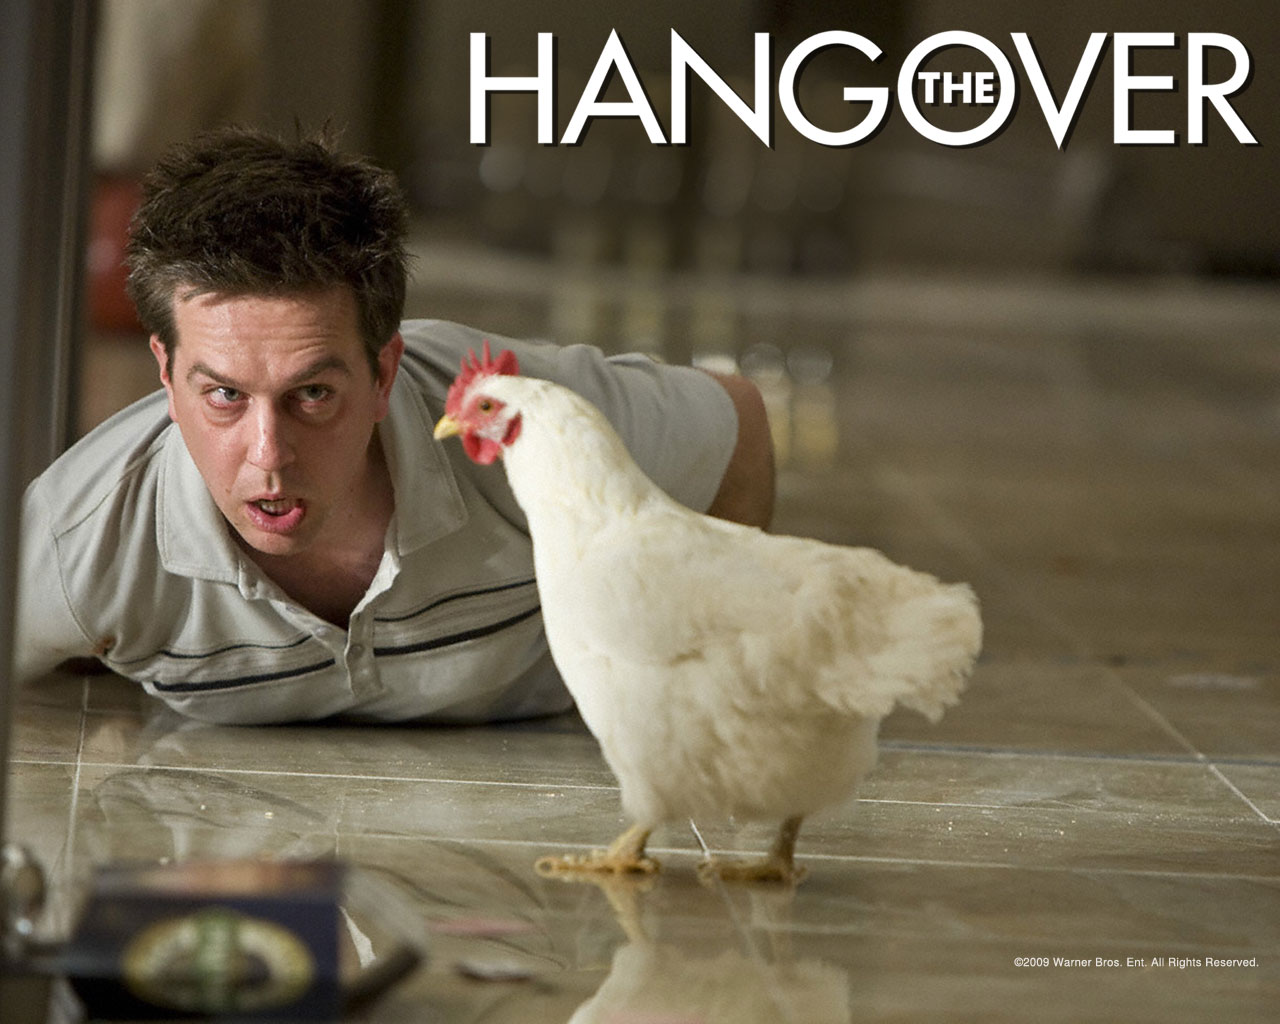 The Hangover is a American comedy movie directed by Todd Phillips The